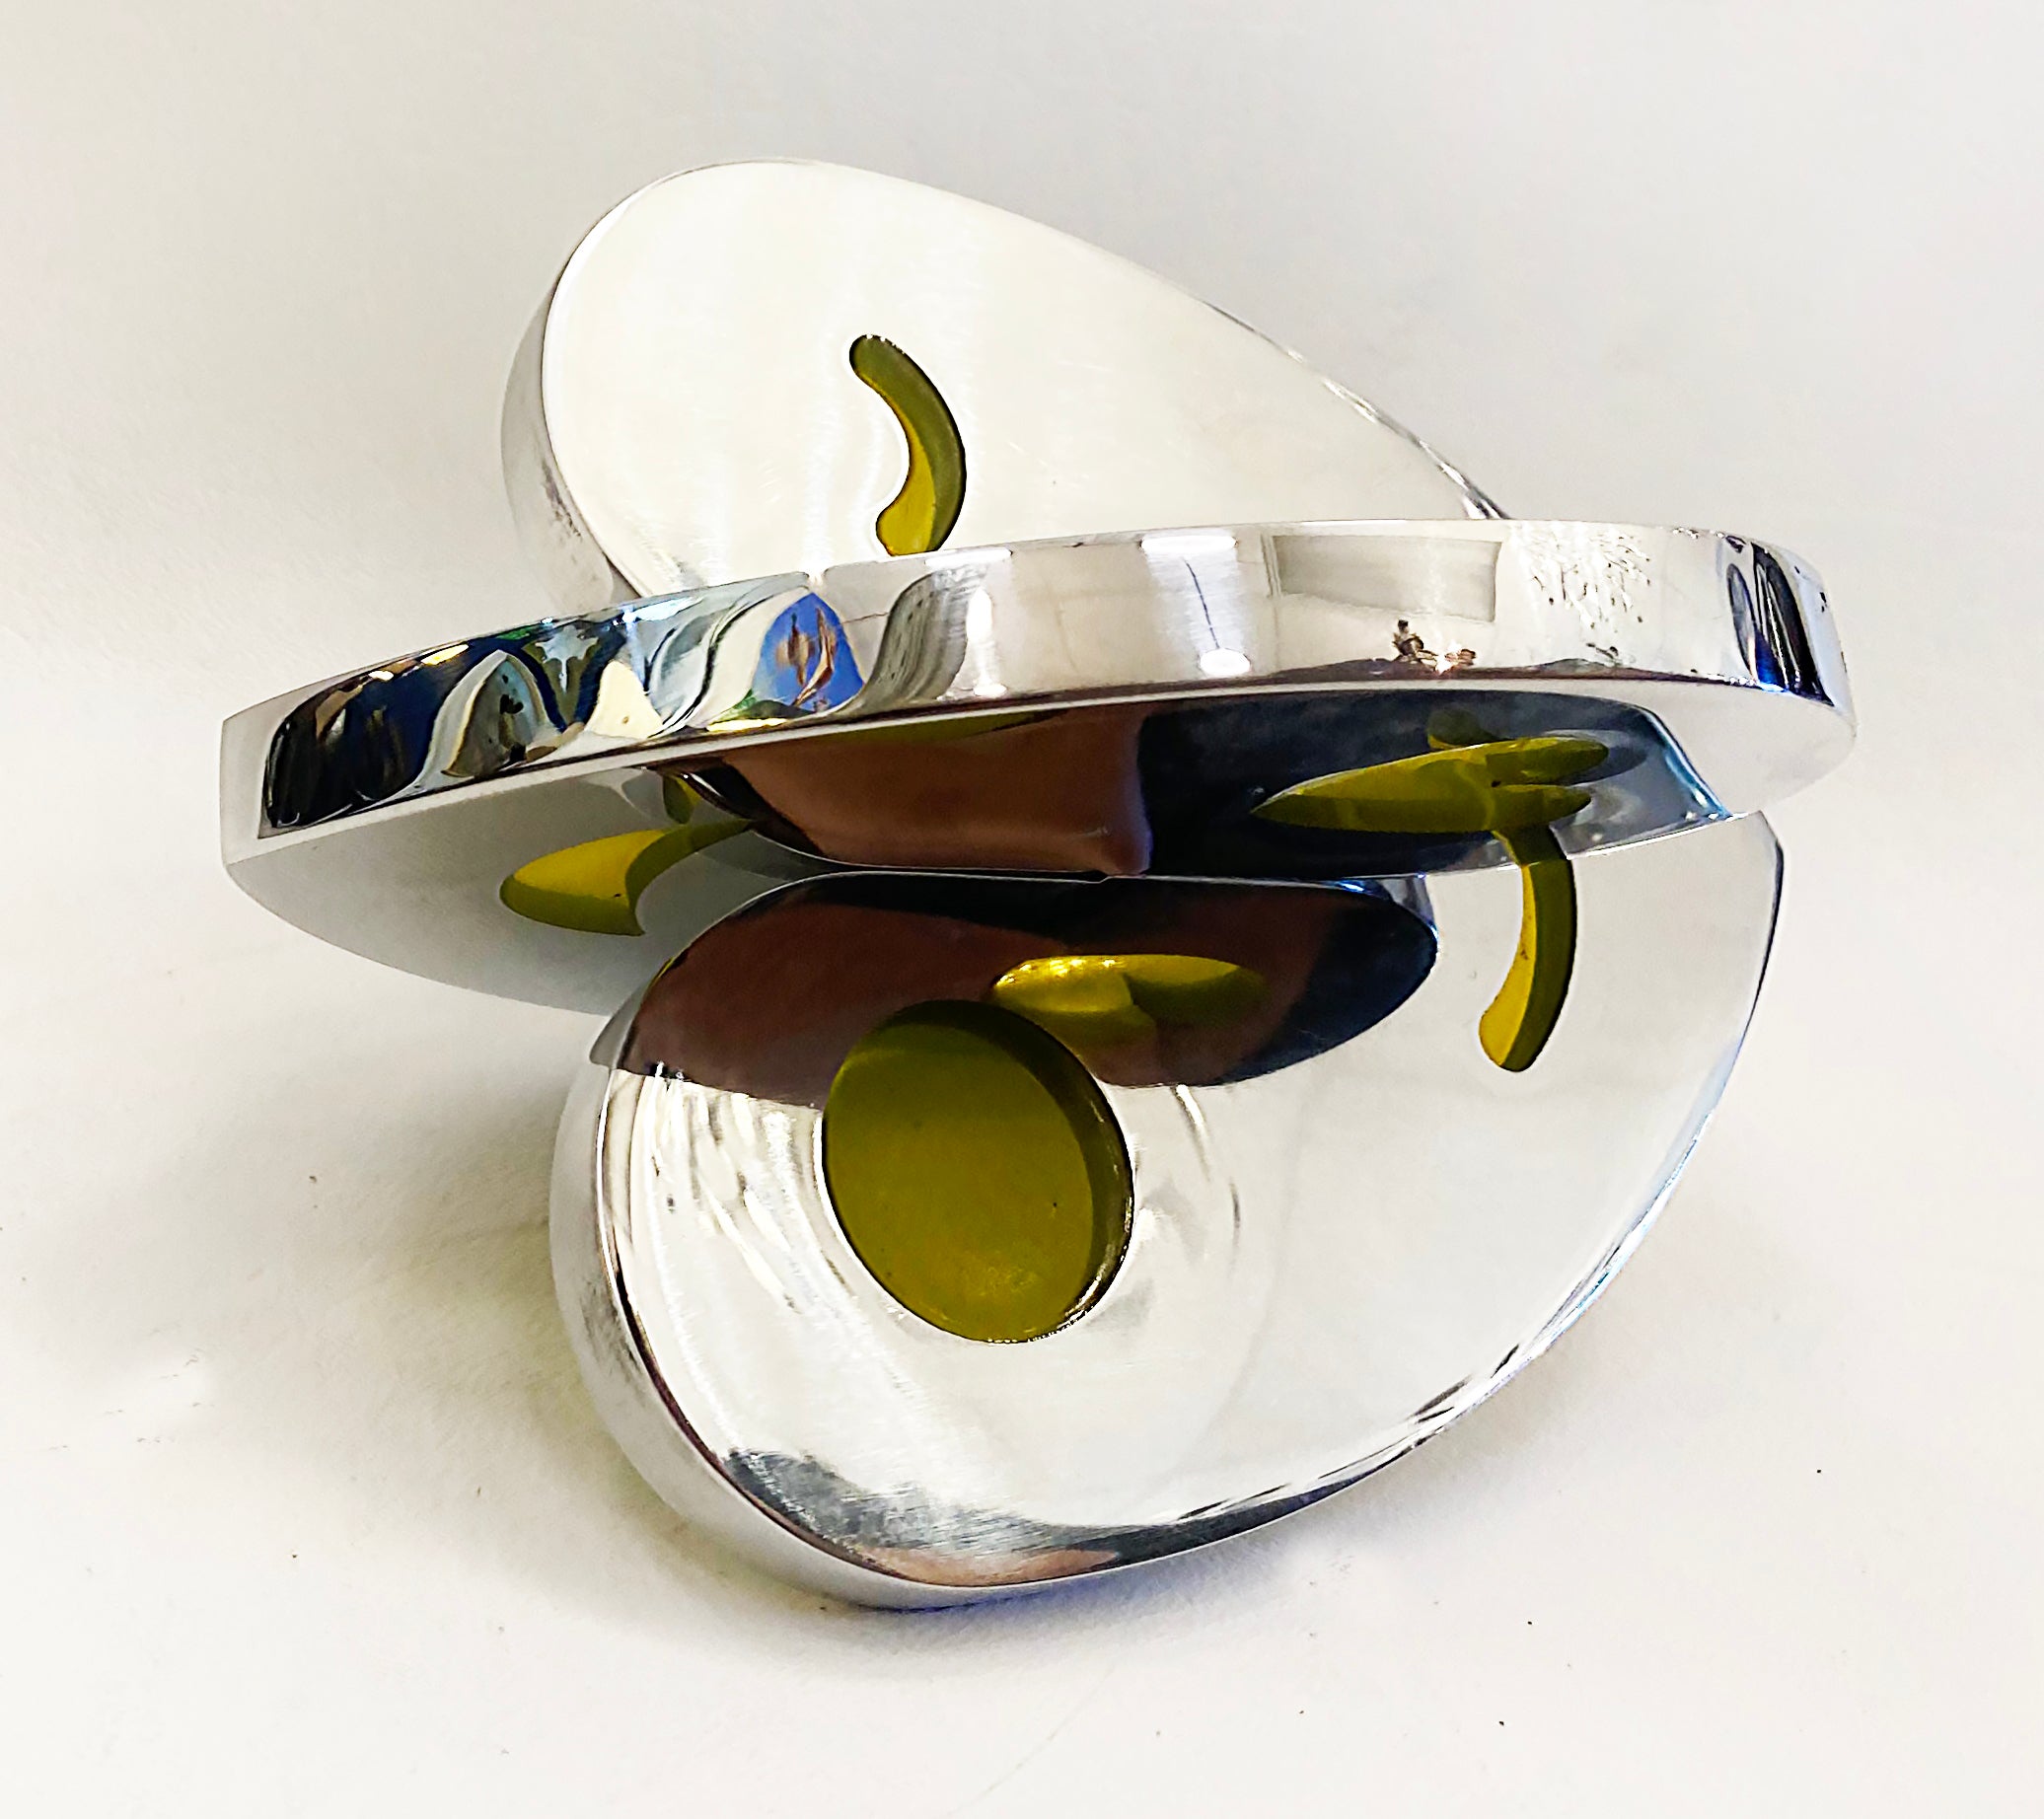 Polished Aluminum, Resin Interlocking Hearts Sculpture by Michael Gitter

Offered for sale is a polished aluminum and epoxy resin interlocking hearts sculpture from the artist Michael Gitter.  This piece is from current production and is